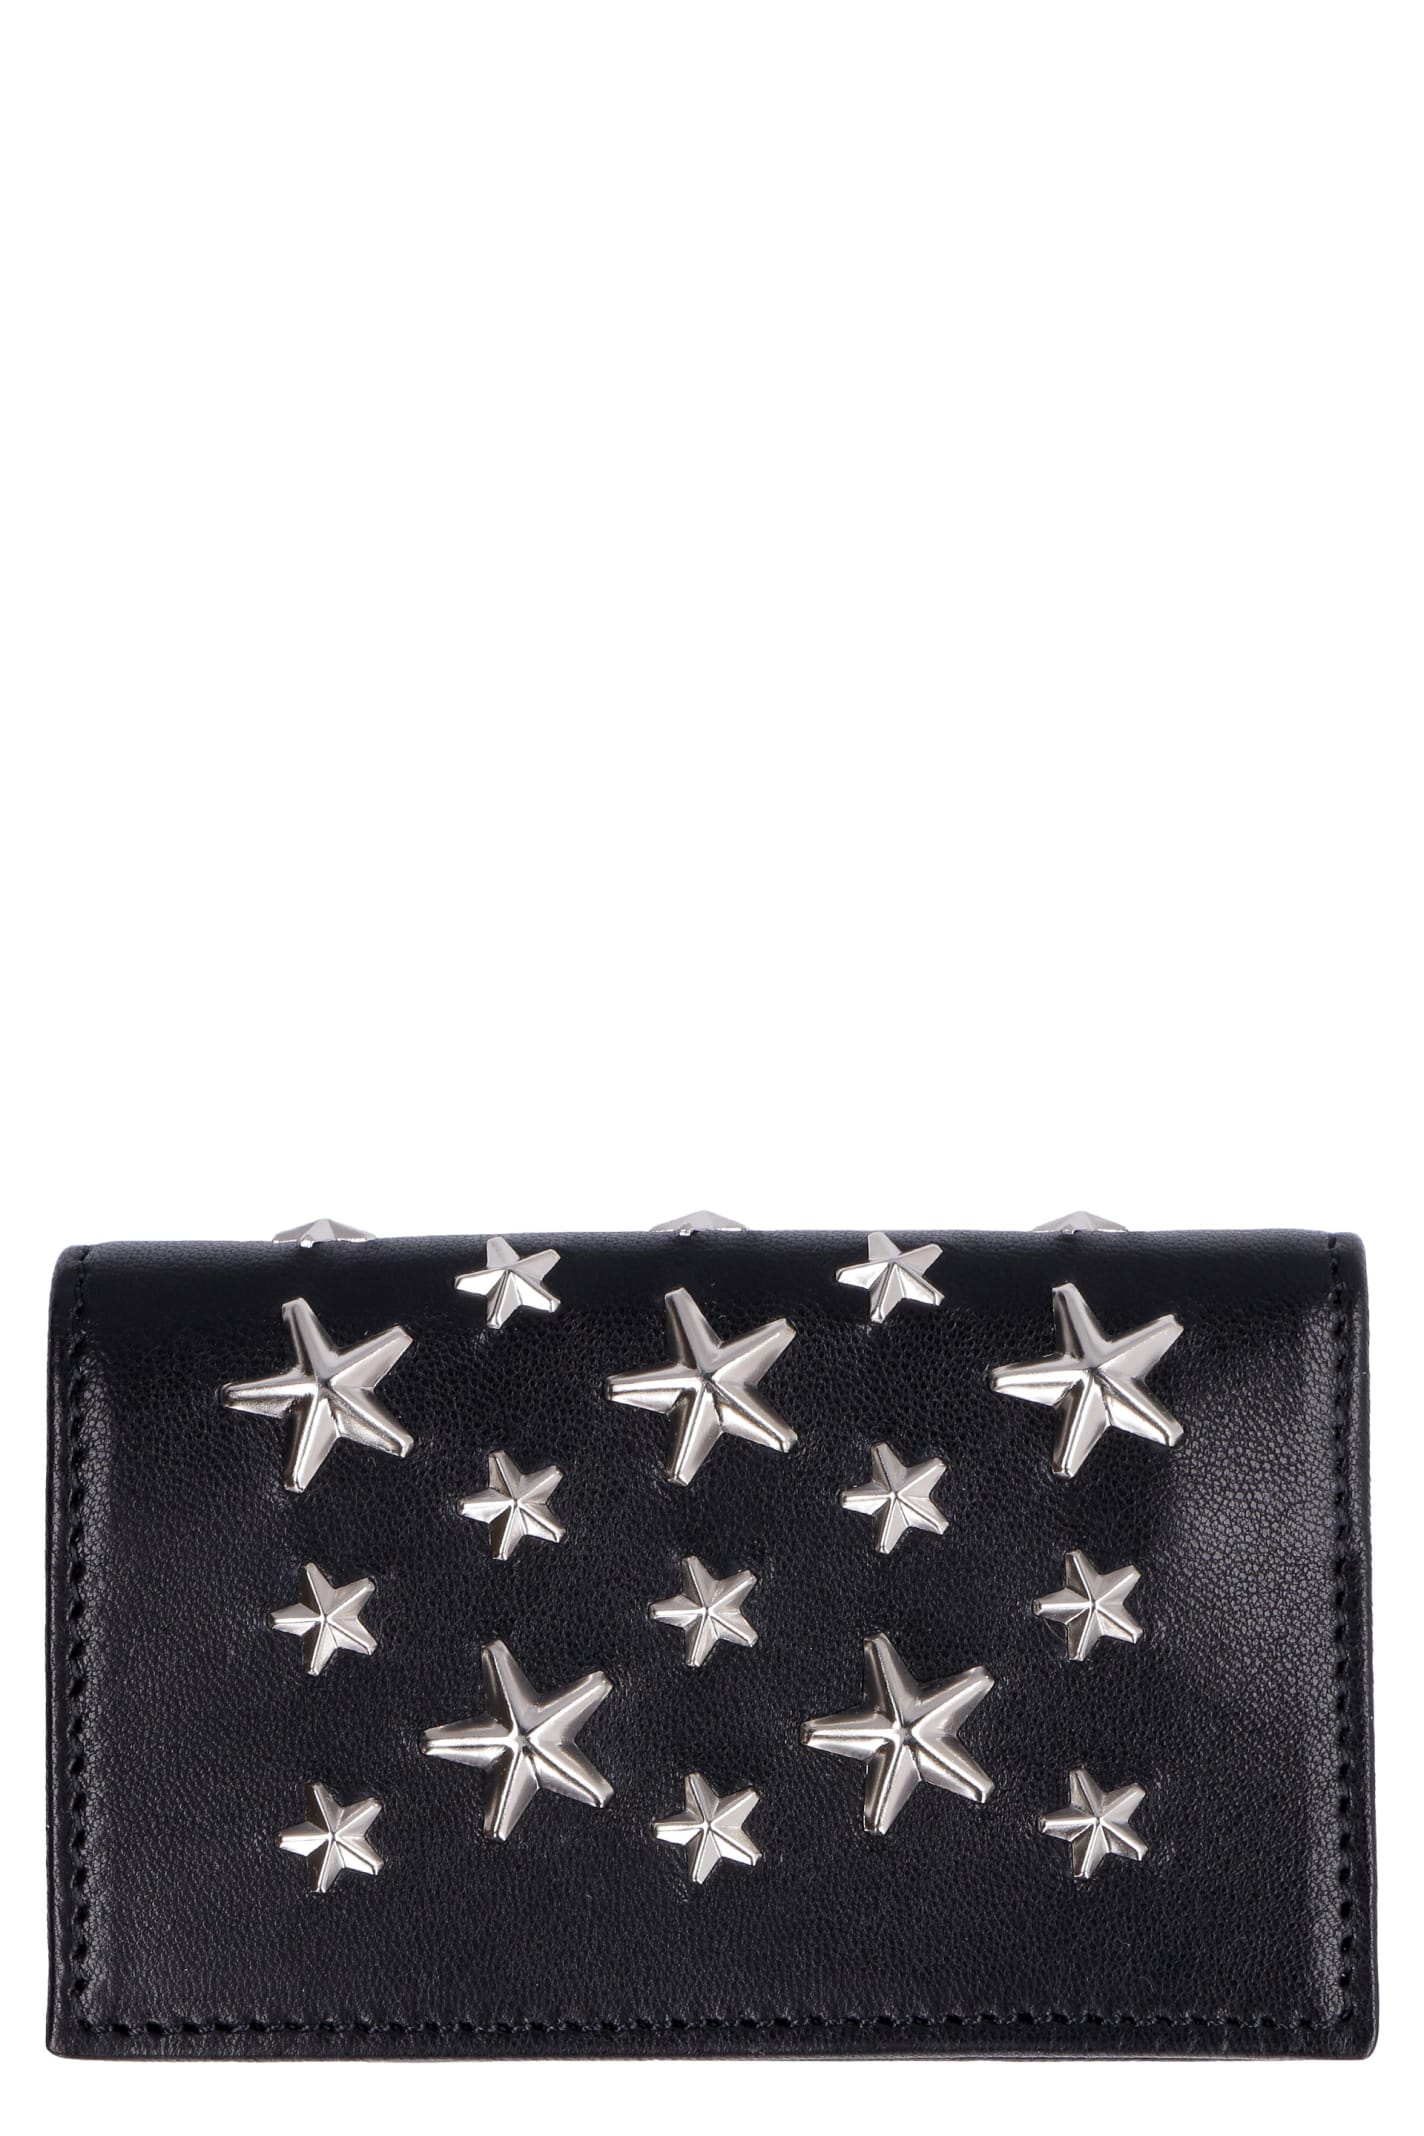 JIMMY CHOO NELLO LEATHER CARD HOLDER,NELLOCST BLACK